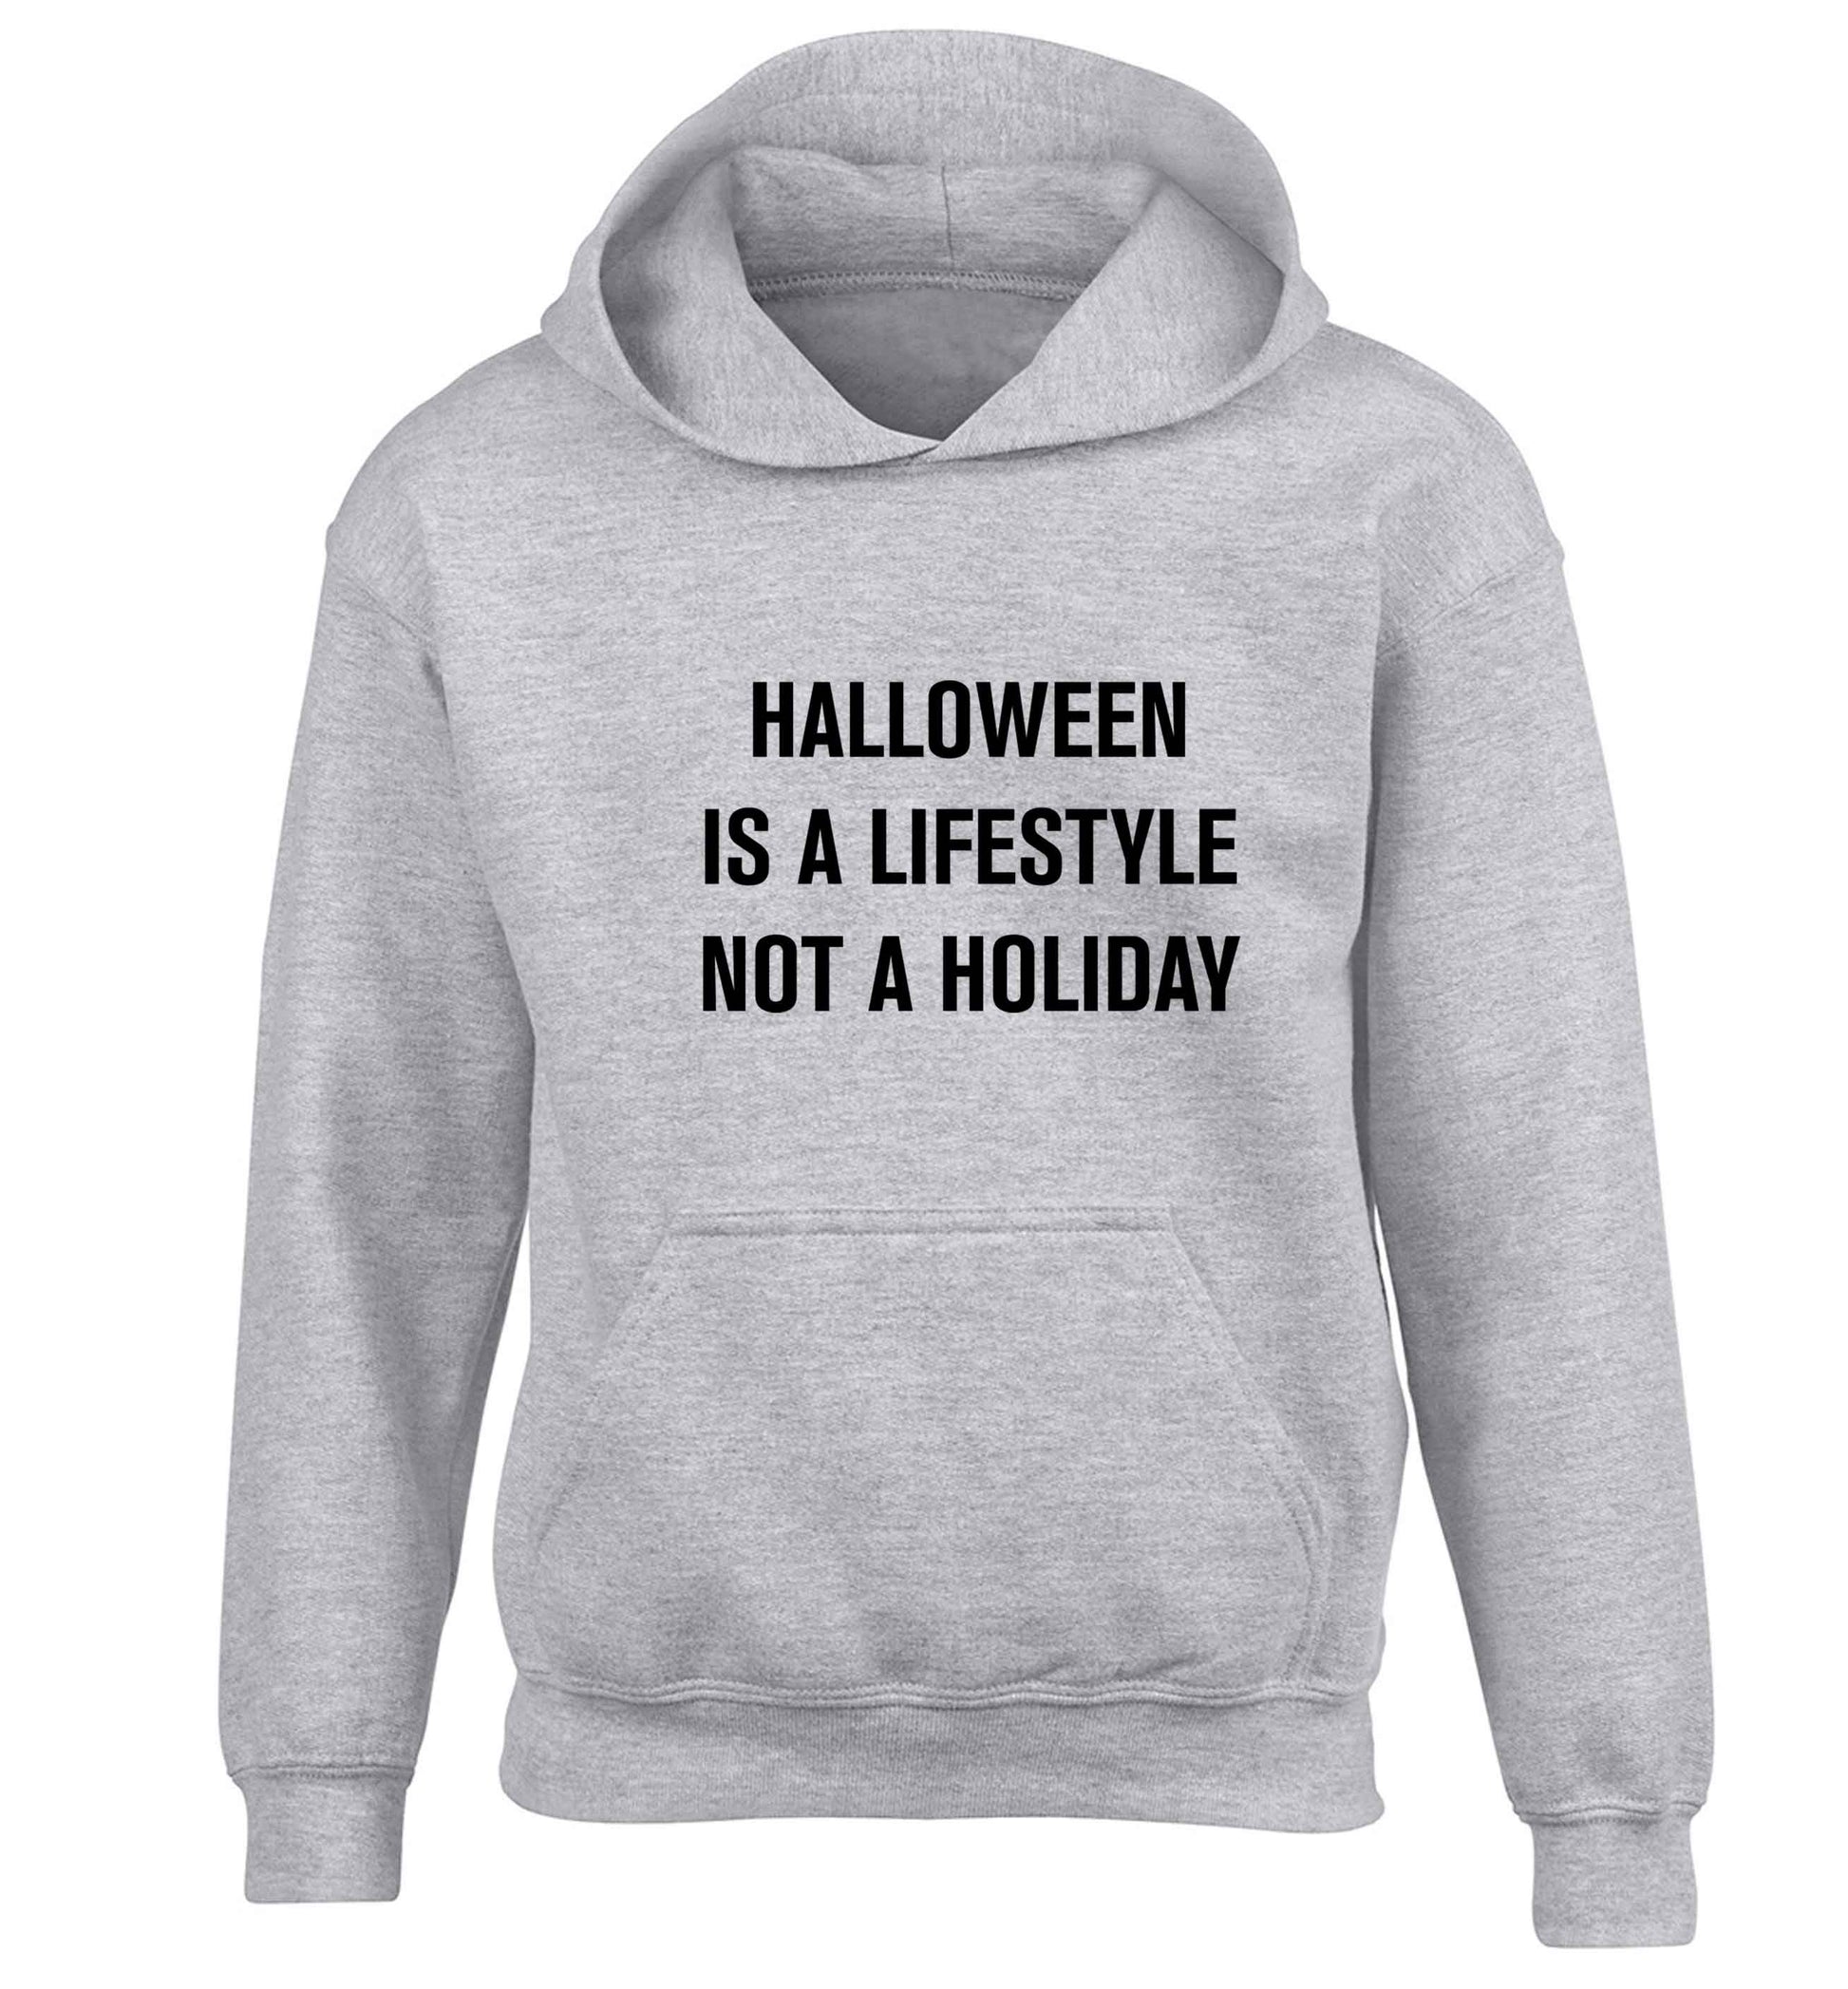 Halloween is a lifestyle not a holiday children's grey hoodie 12-13 Years